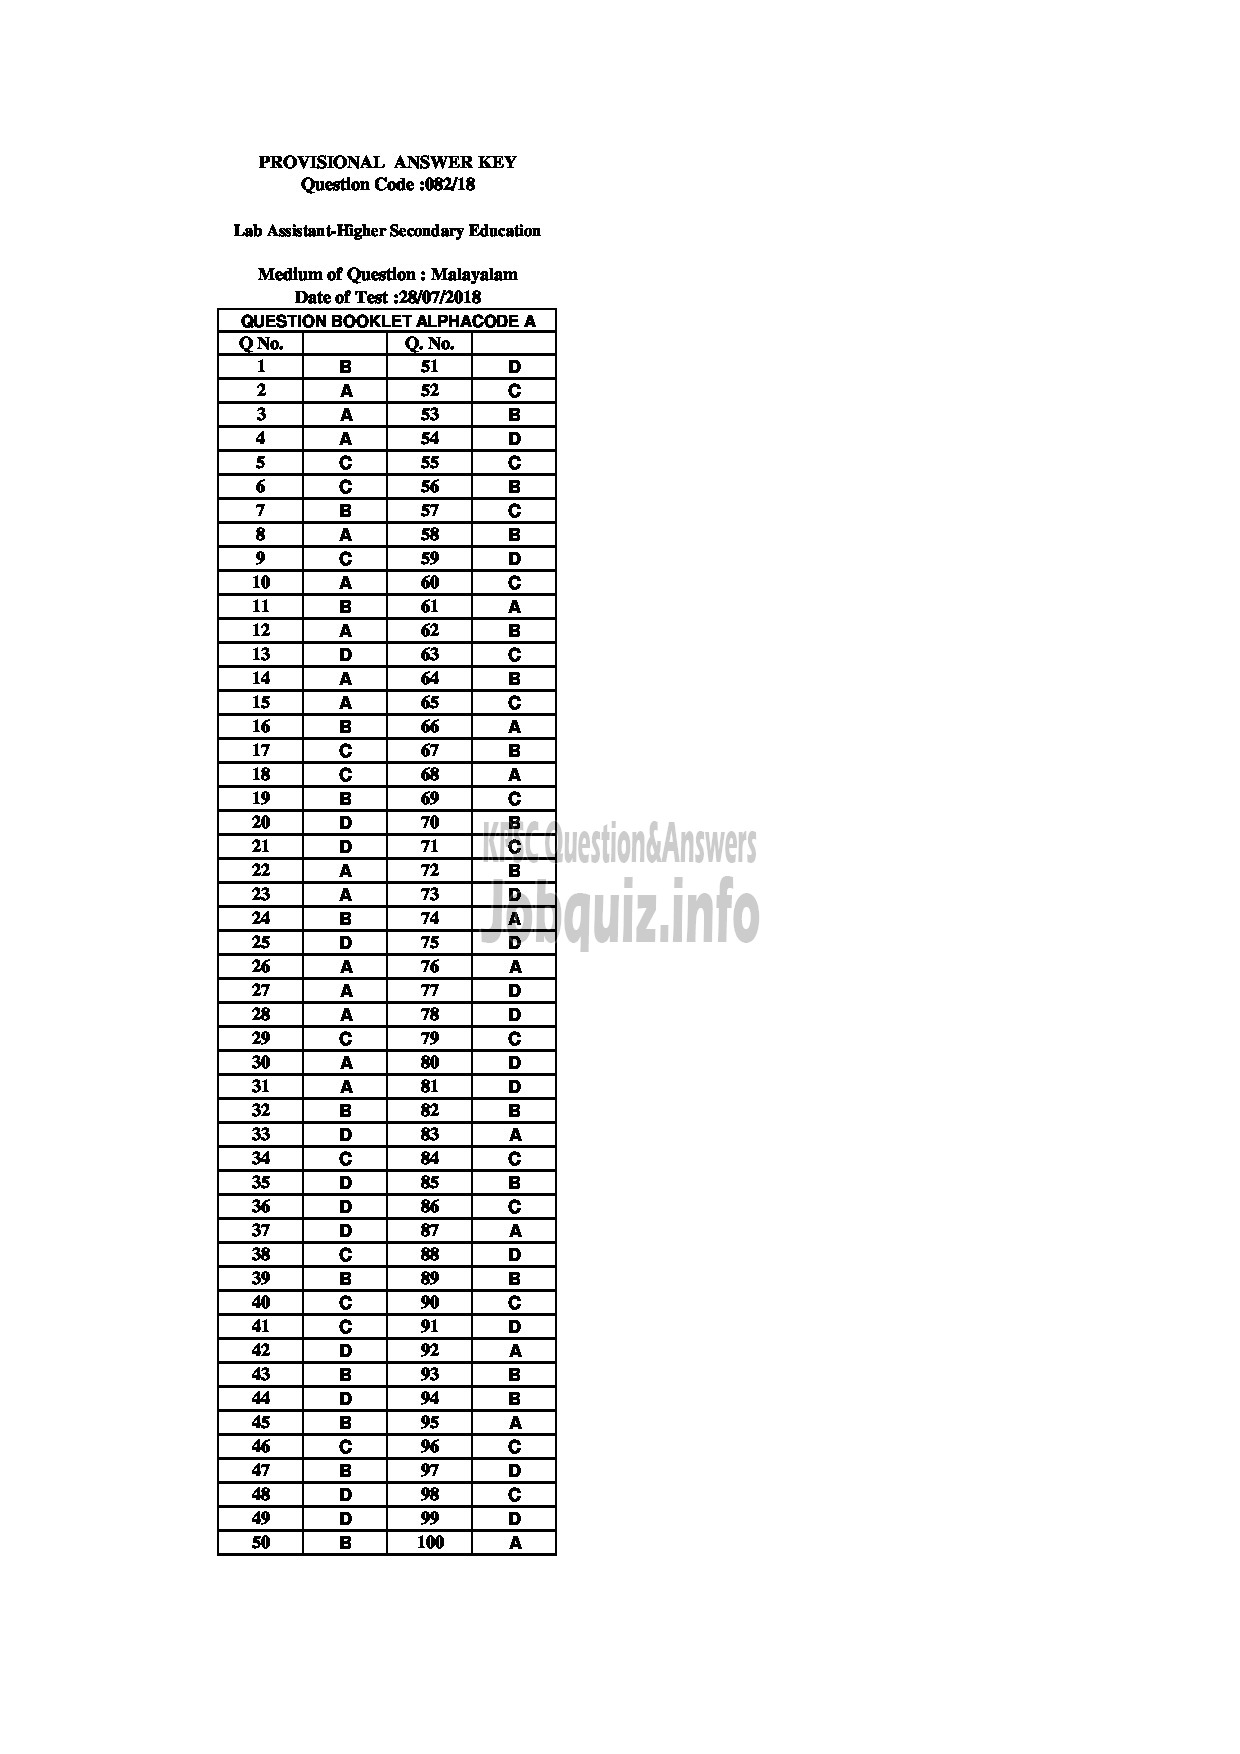 Kerala PSC Answer Key - LAB ASSISTANT HIGHER SECONDARY EDUCATION